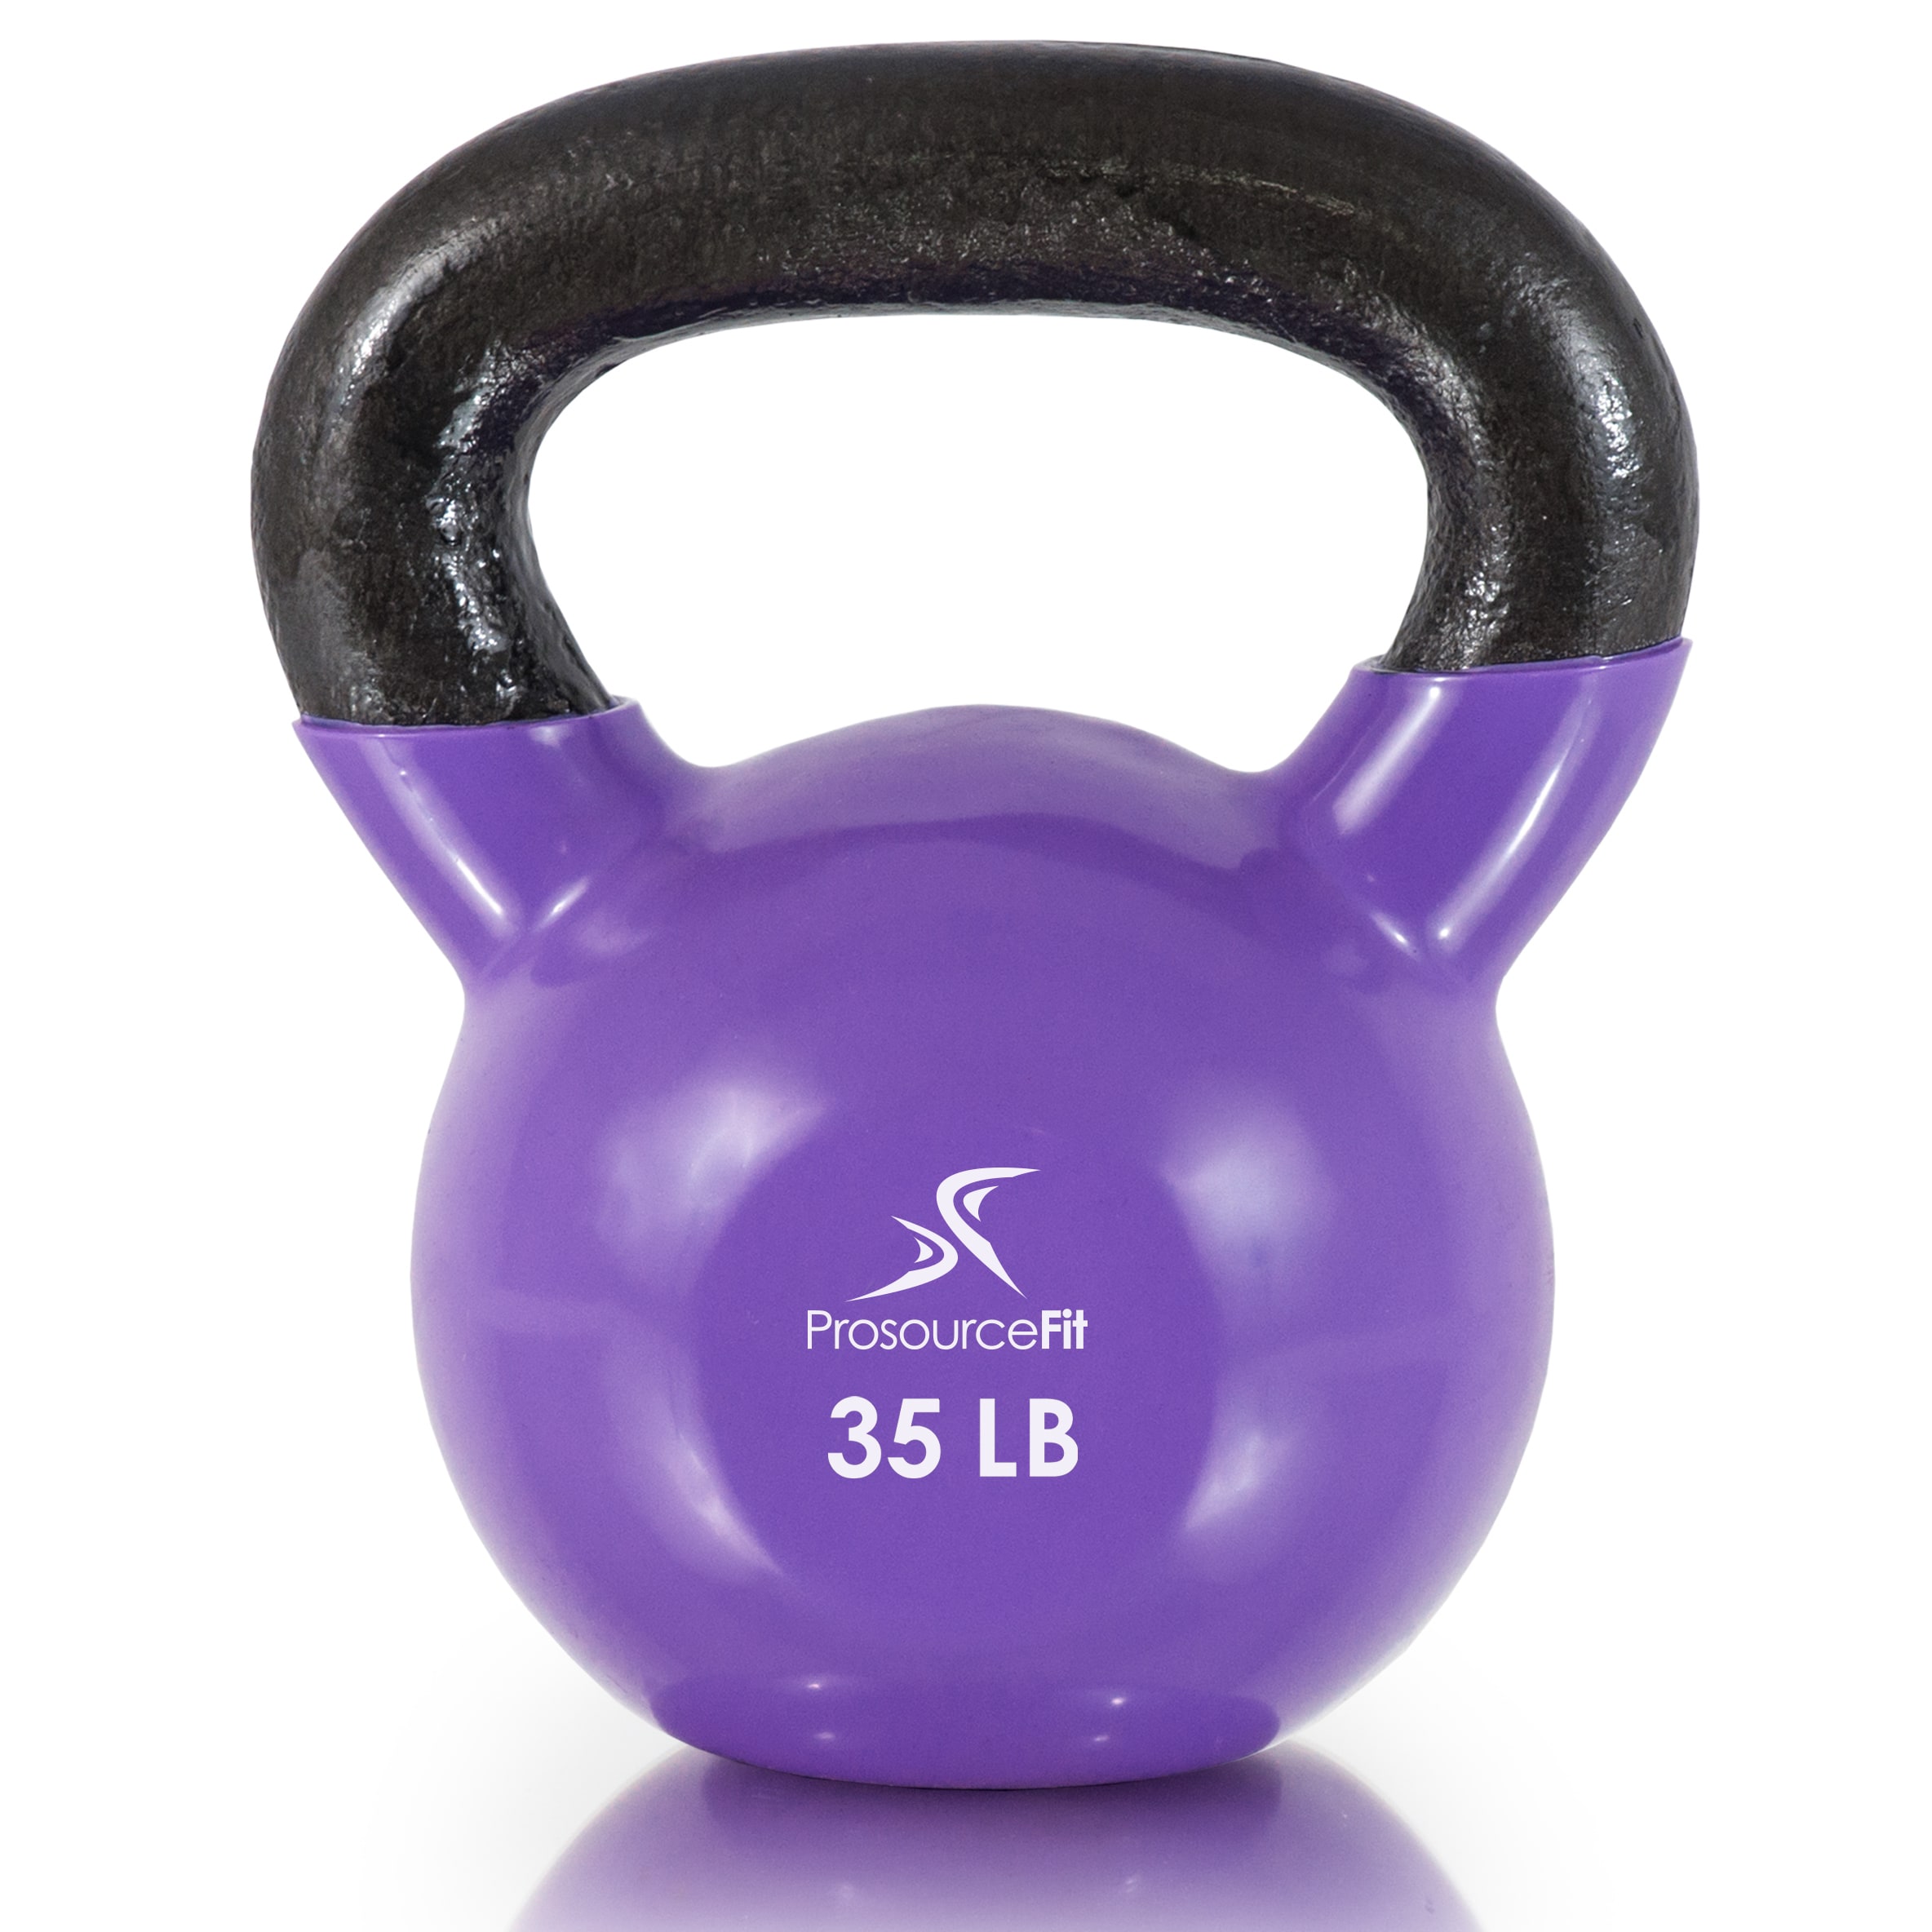 French Fitness Cast Iron Kettlebell 35 lbs